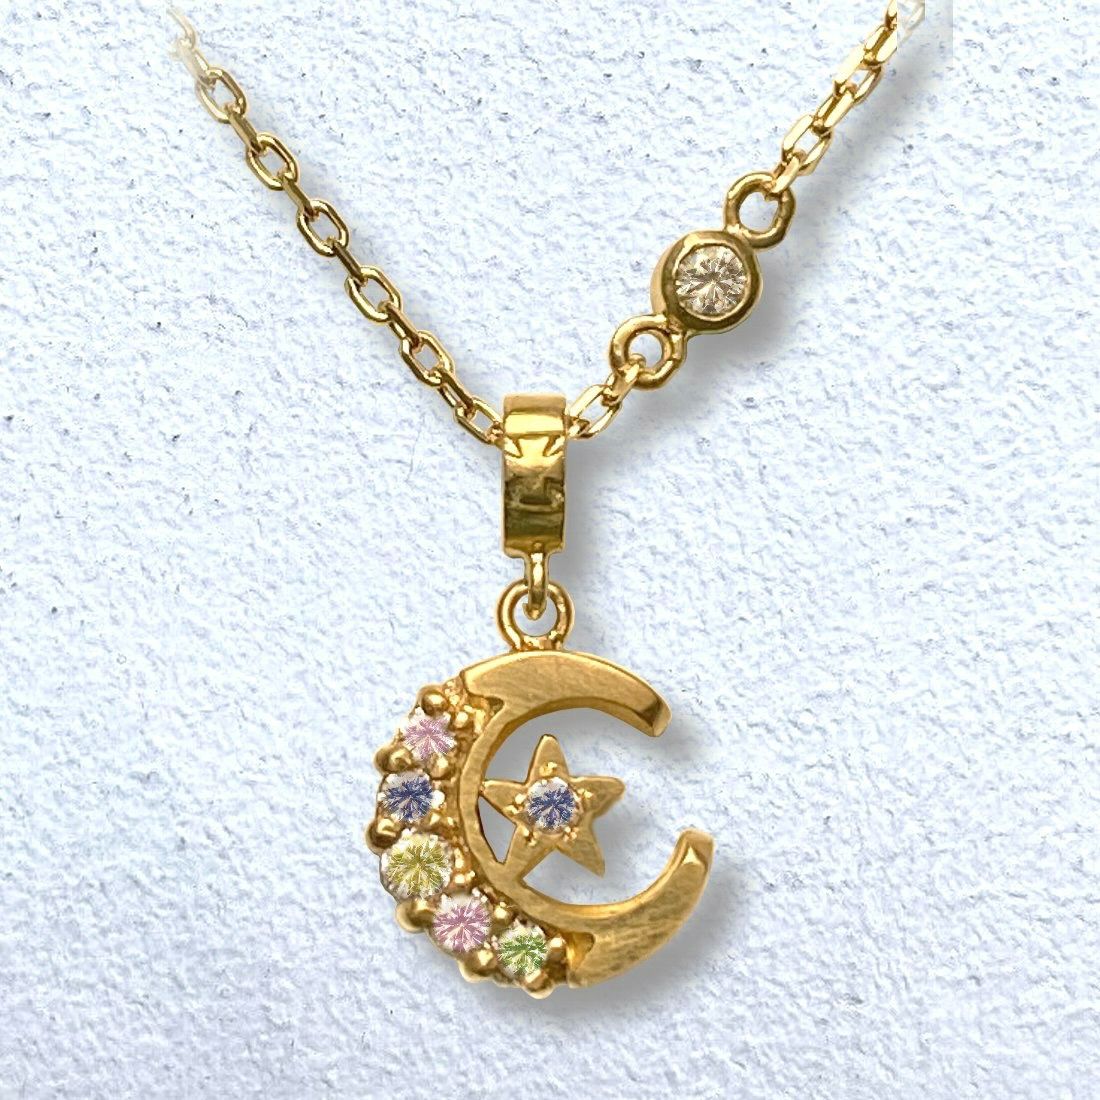 PETITE CRESCENT MOON NECKLACE 18k Yellow Gold / Multi Color ...